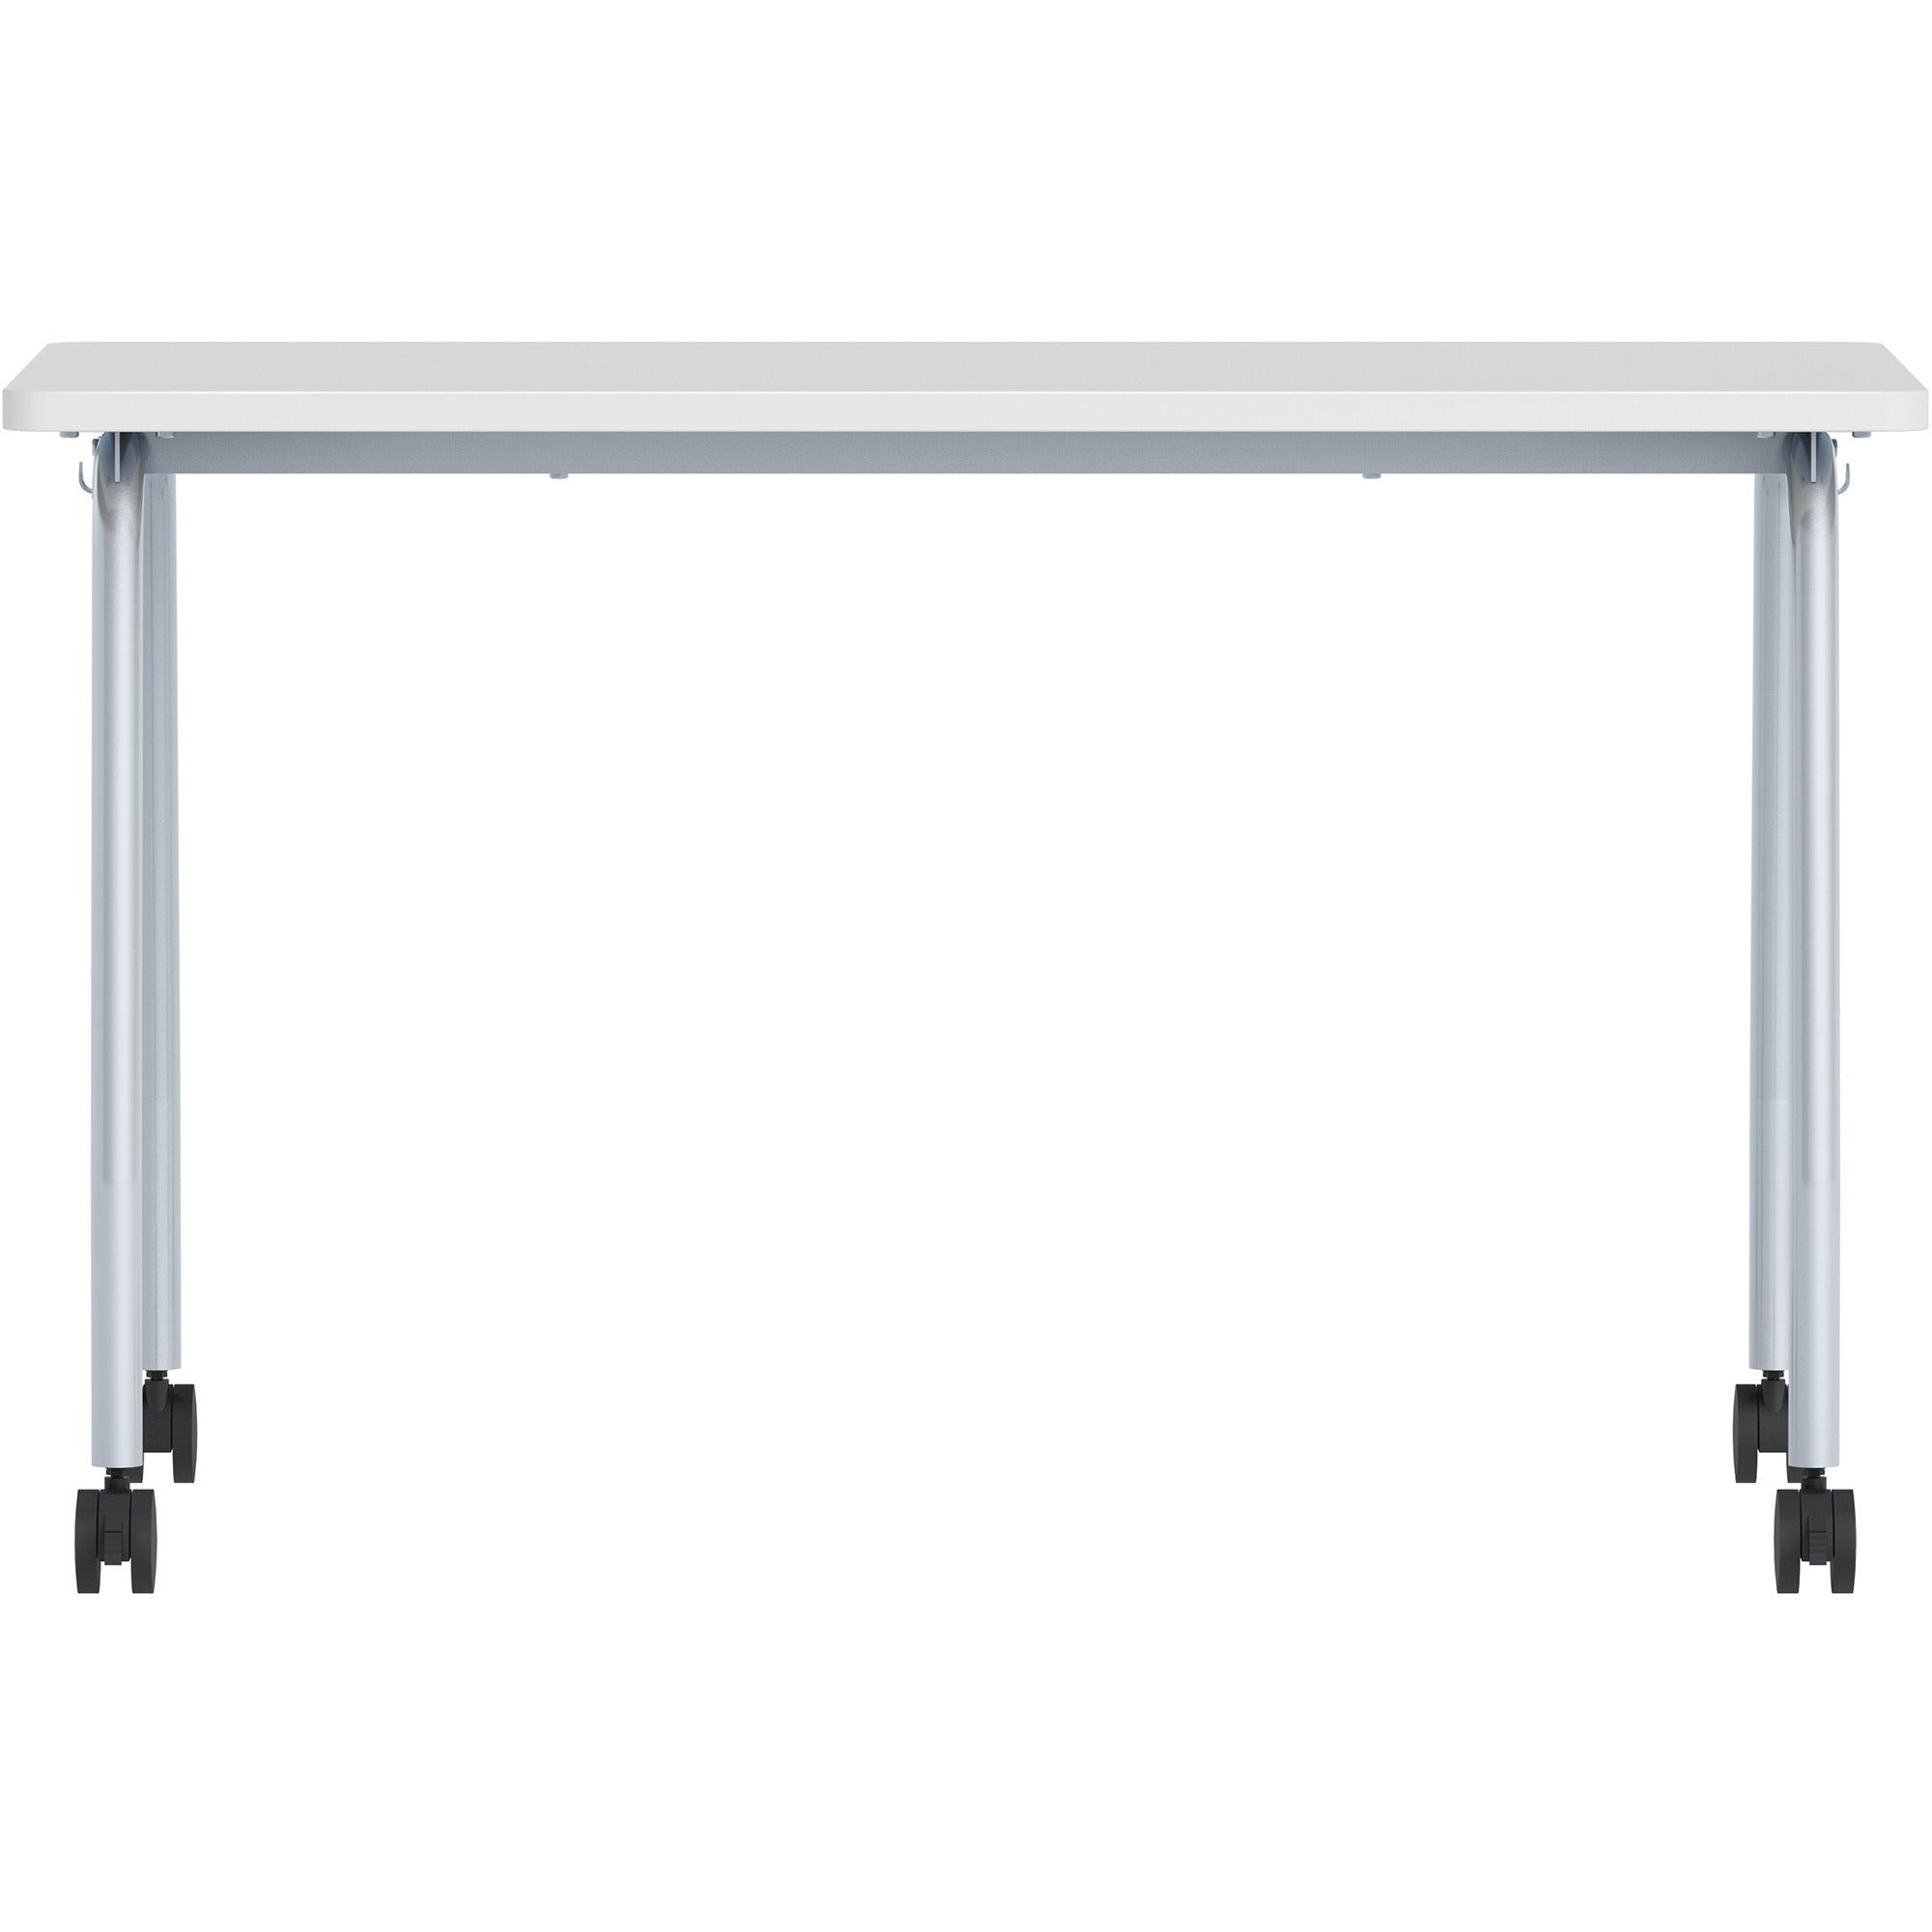 lorell-training-table-for-table-toplaminated-top-300-lb-capacity-2950-table-top-length-x-2363-table-top-width-x-1-table-top-thickness-4725-height-assembly-required-gray-particleboard-top-material-1-each_llr60847 - 3